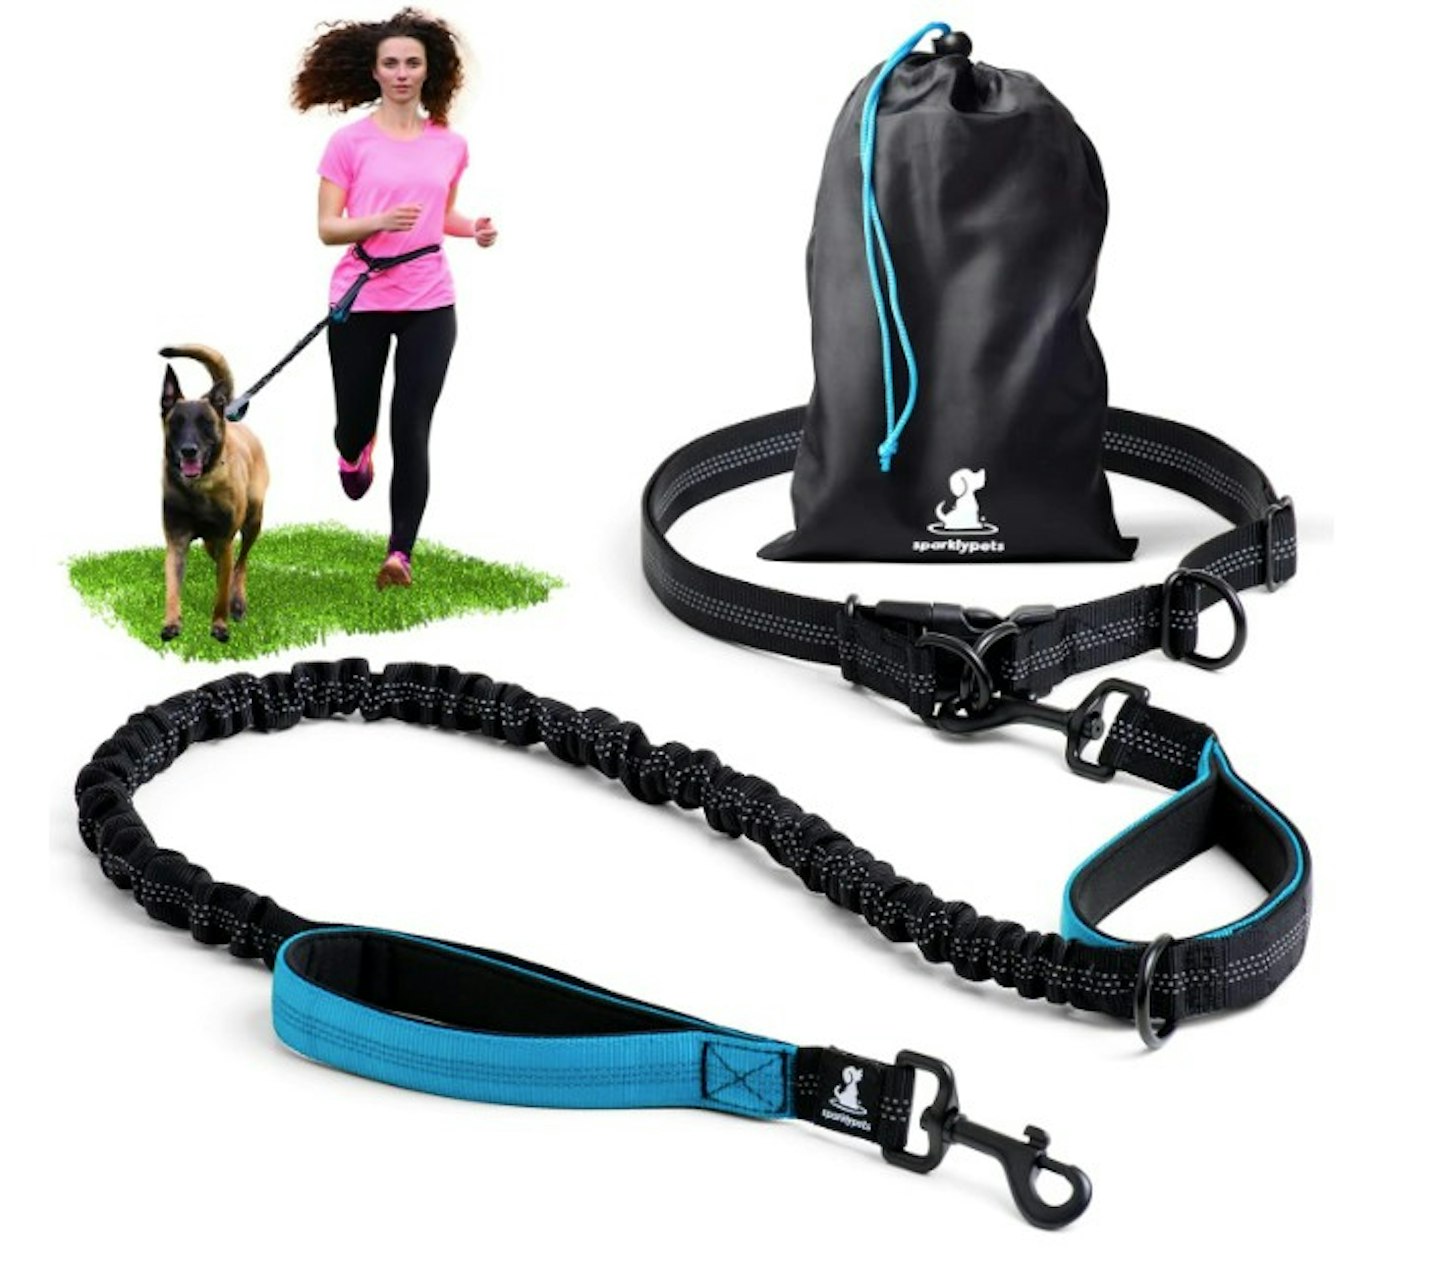 SparklyPets Hands Free Dog Lead for Medium and Large Dogs